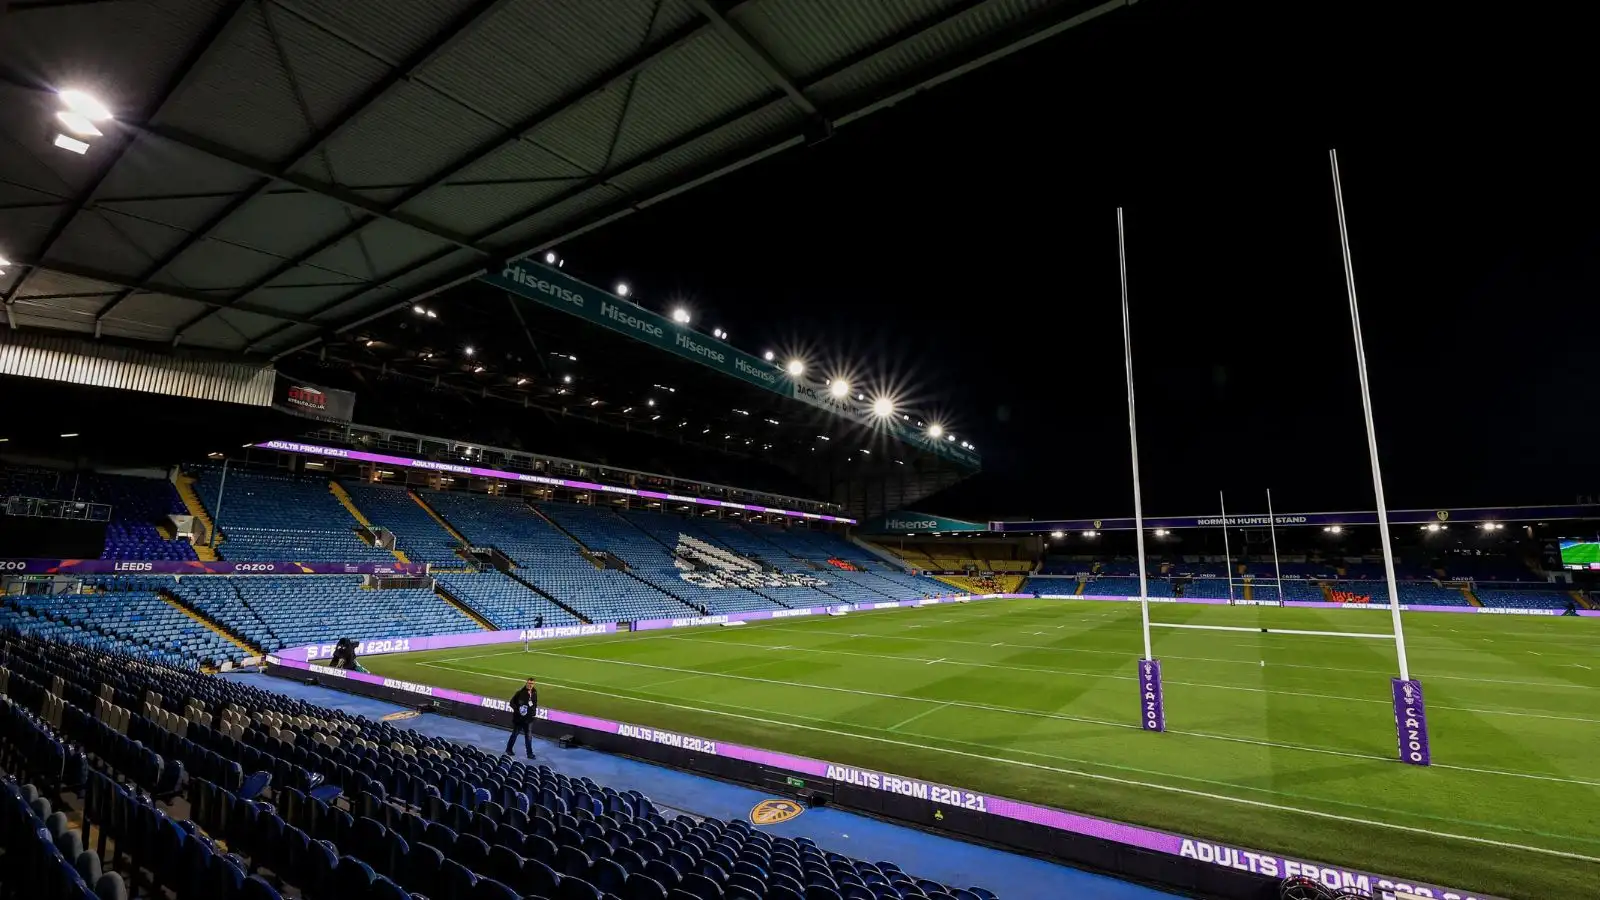 The 15 rugby league games to have taken place at Elland Road since the turn of the millennium